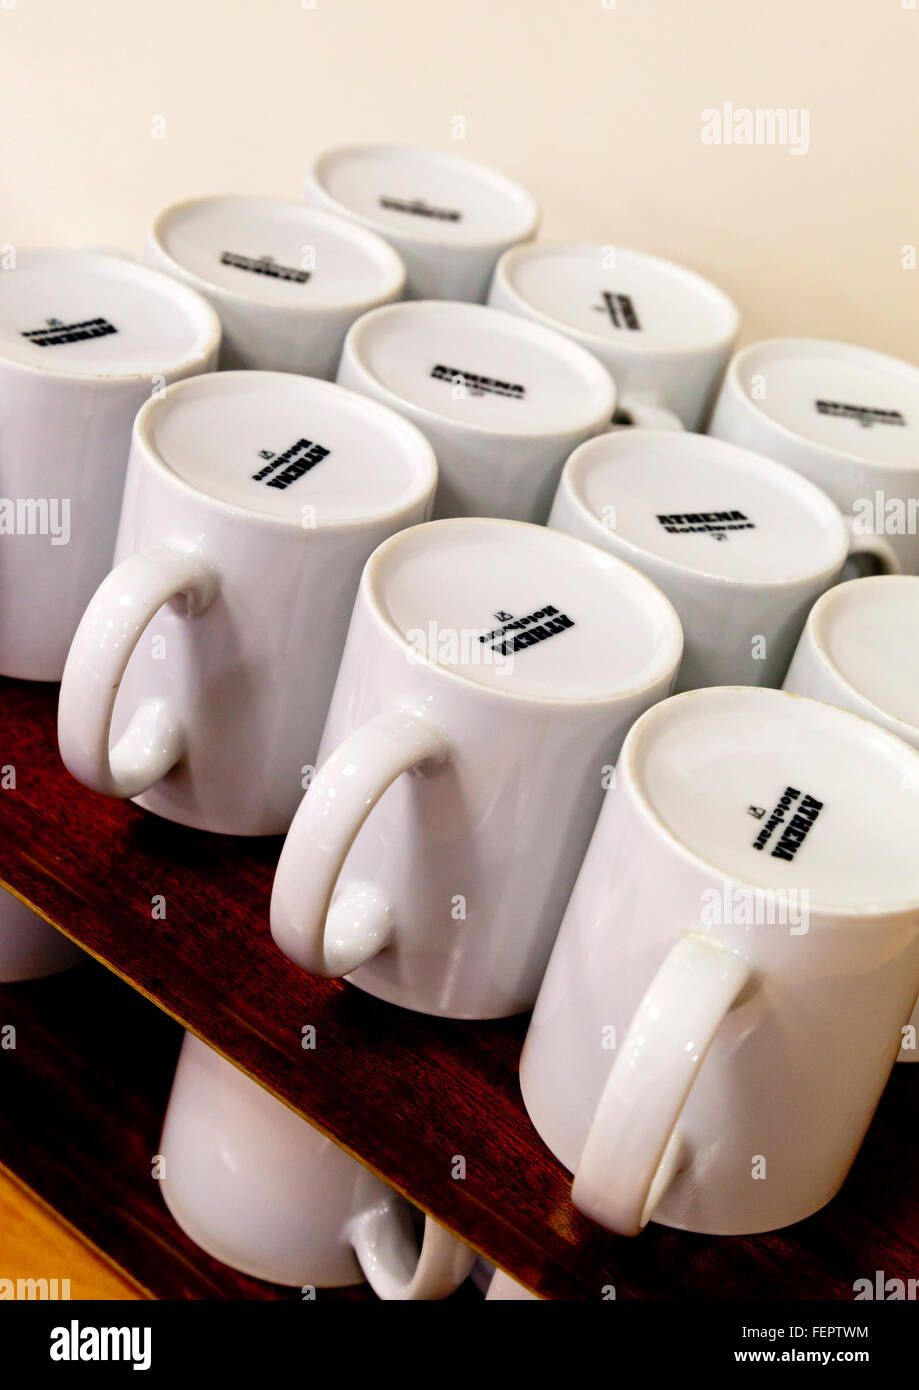 White china mugs on waiting to be used in a communal dining area Stock Photo